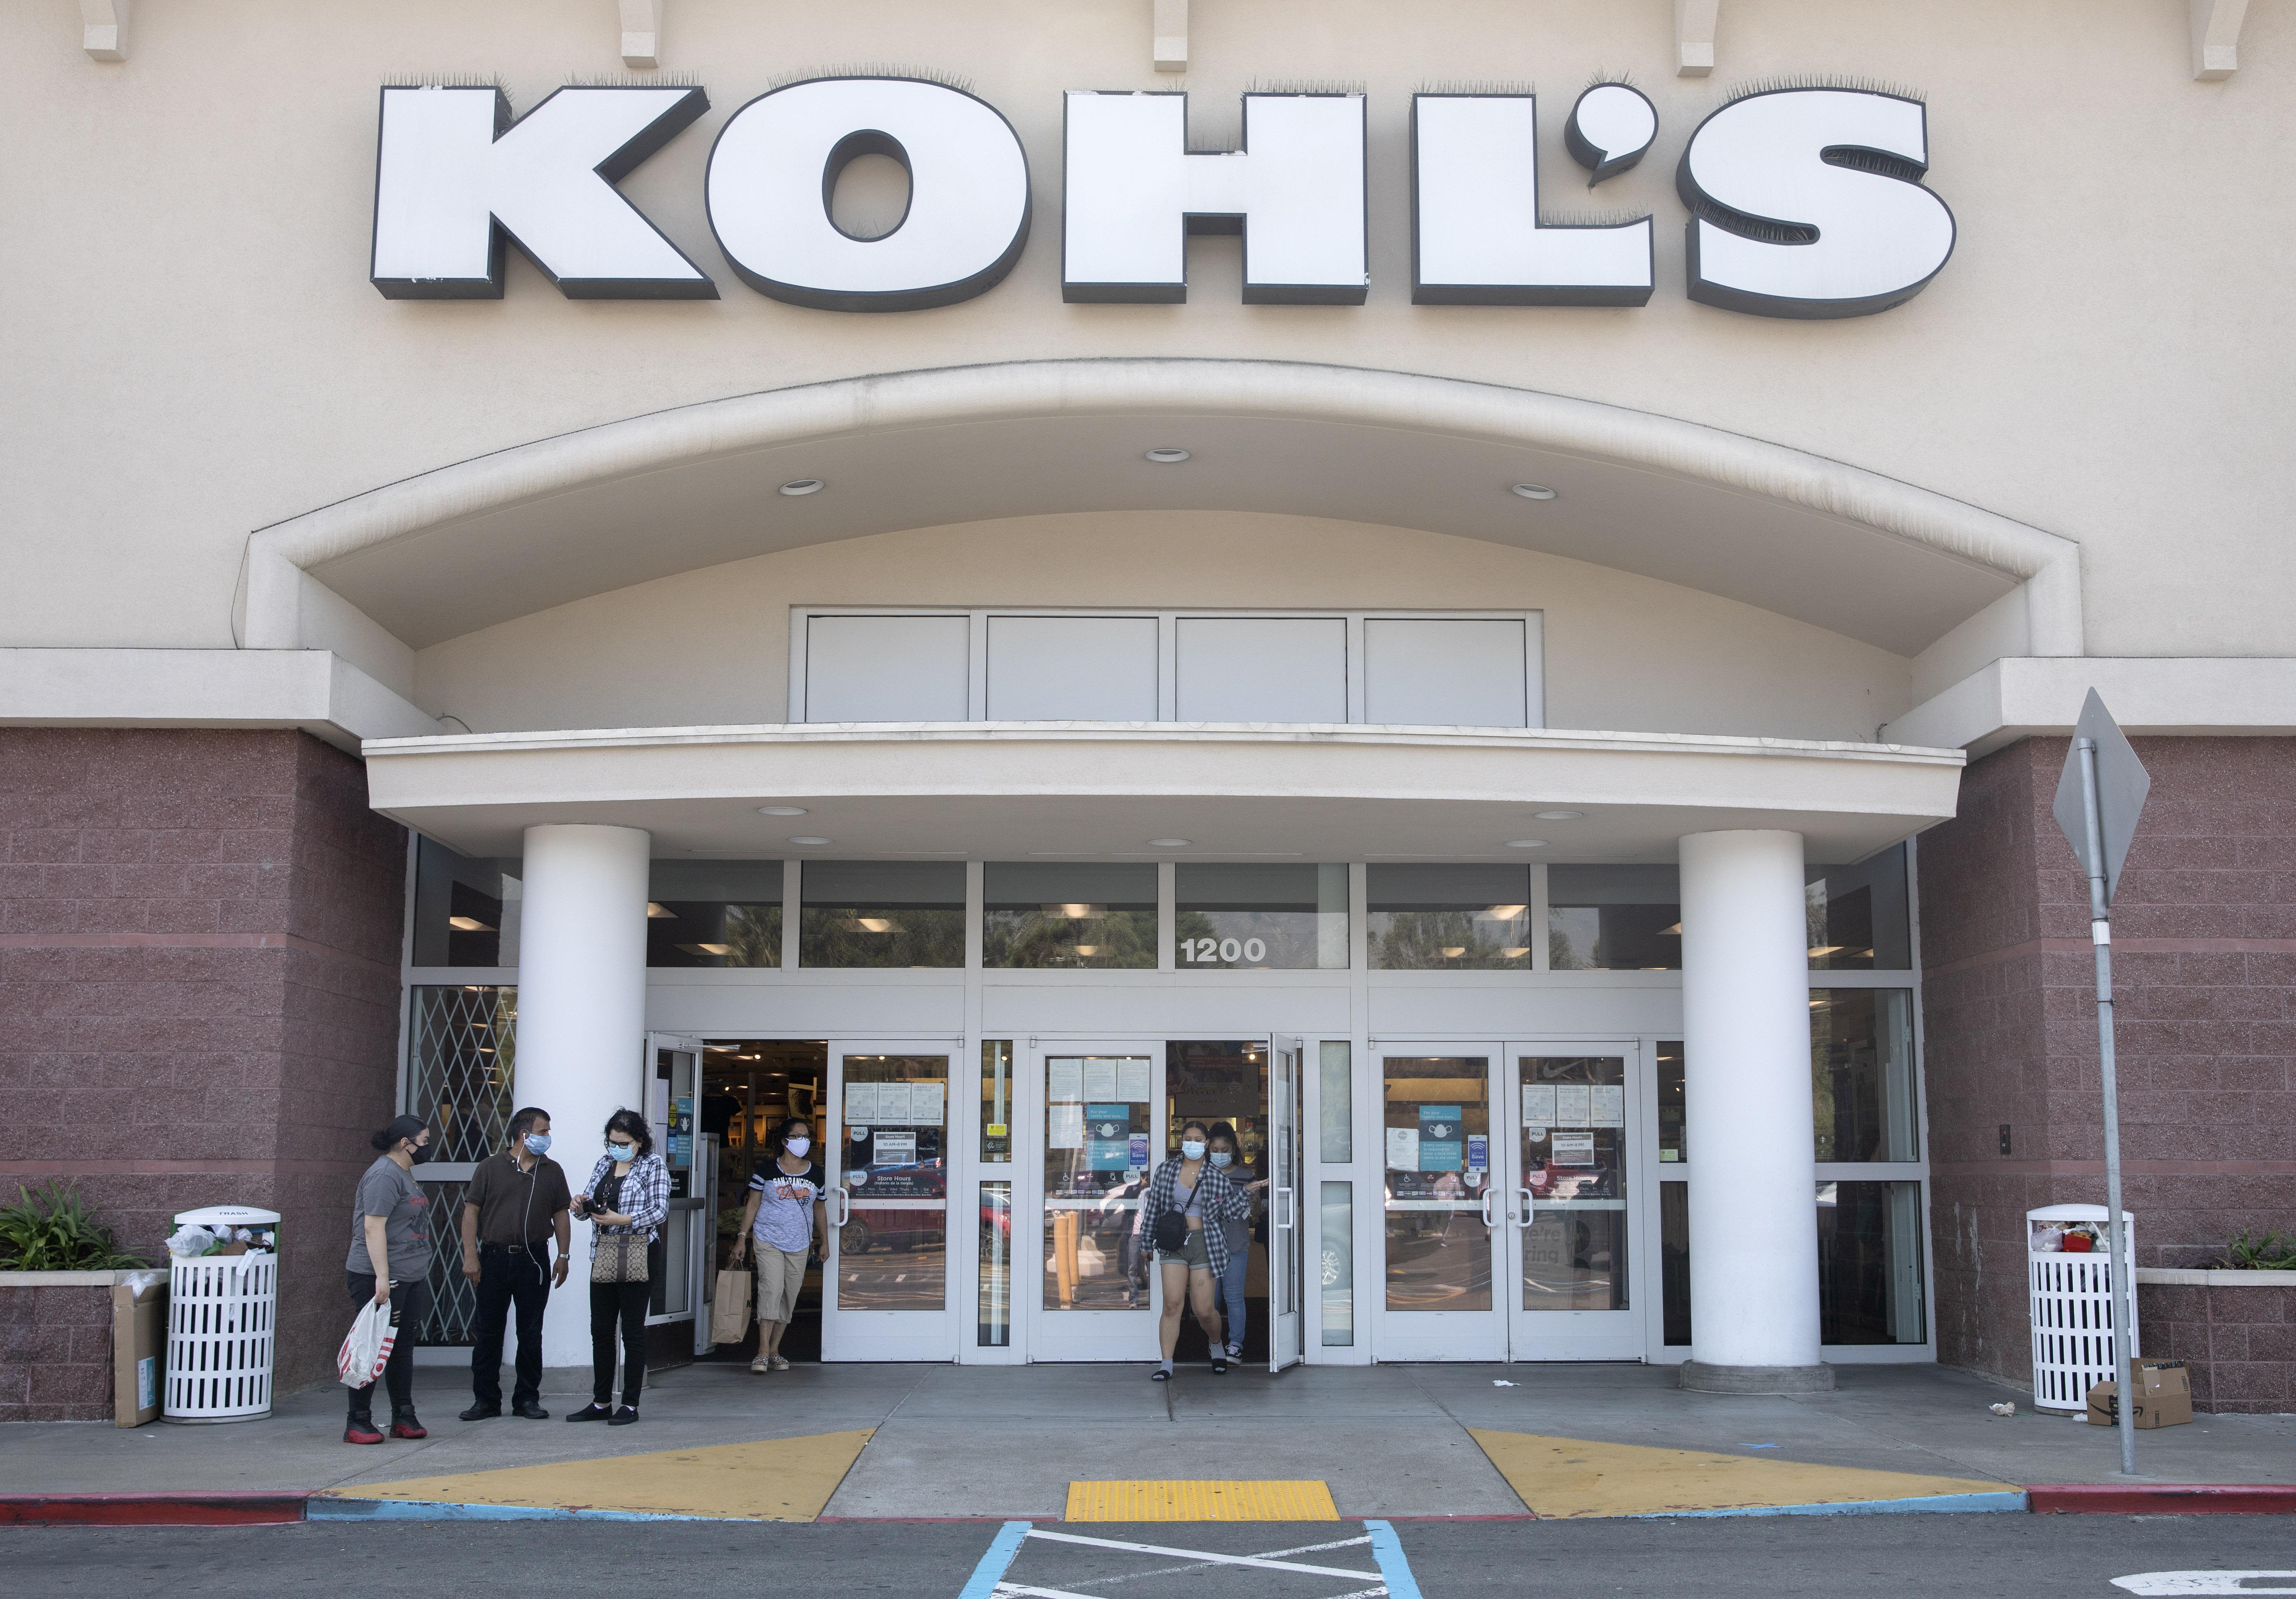 Stores live in fear of . The Kohl's CEO, Michelle Gass